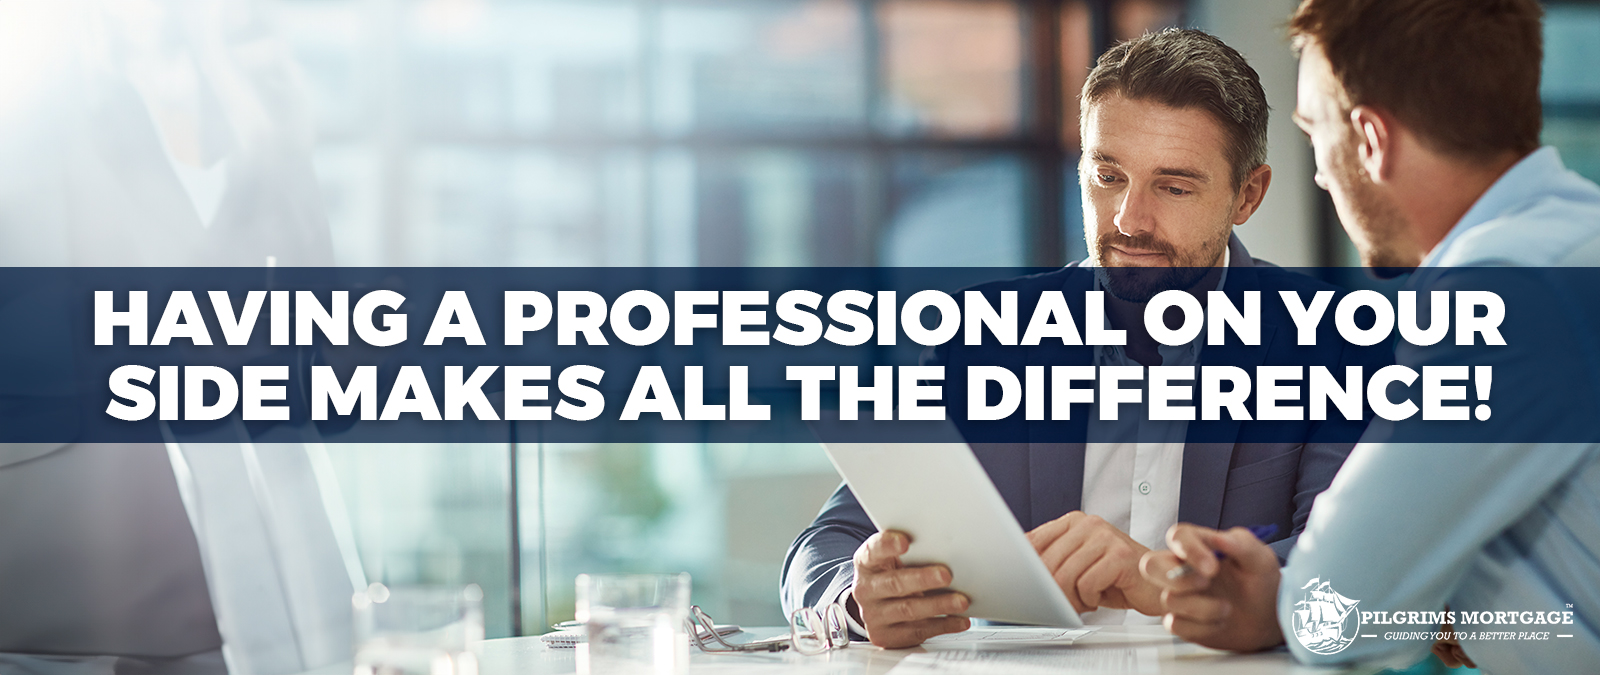 Having A Professional On Your Side Makes All The Difference!